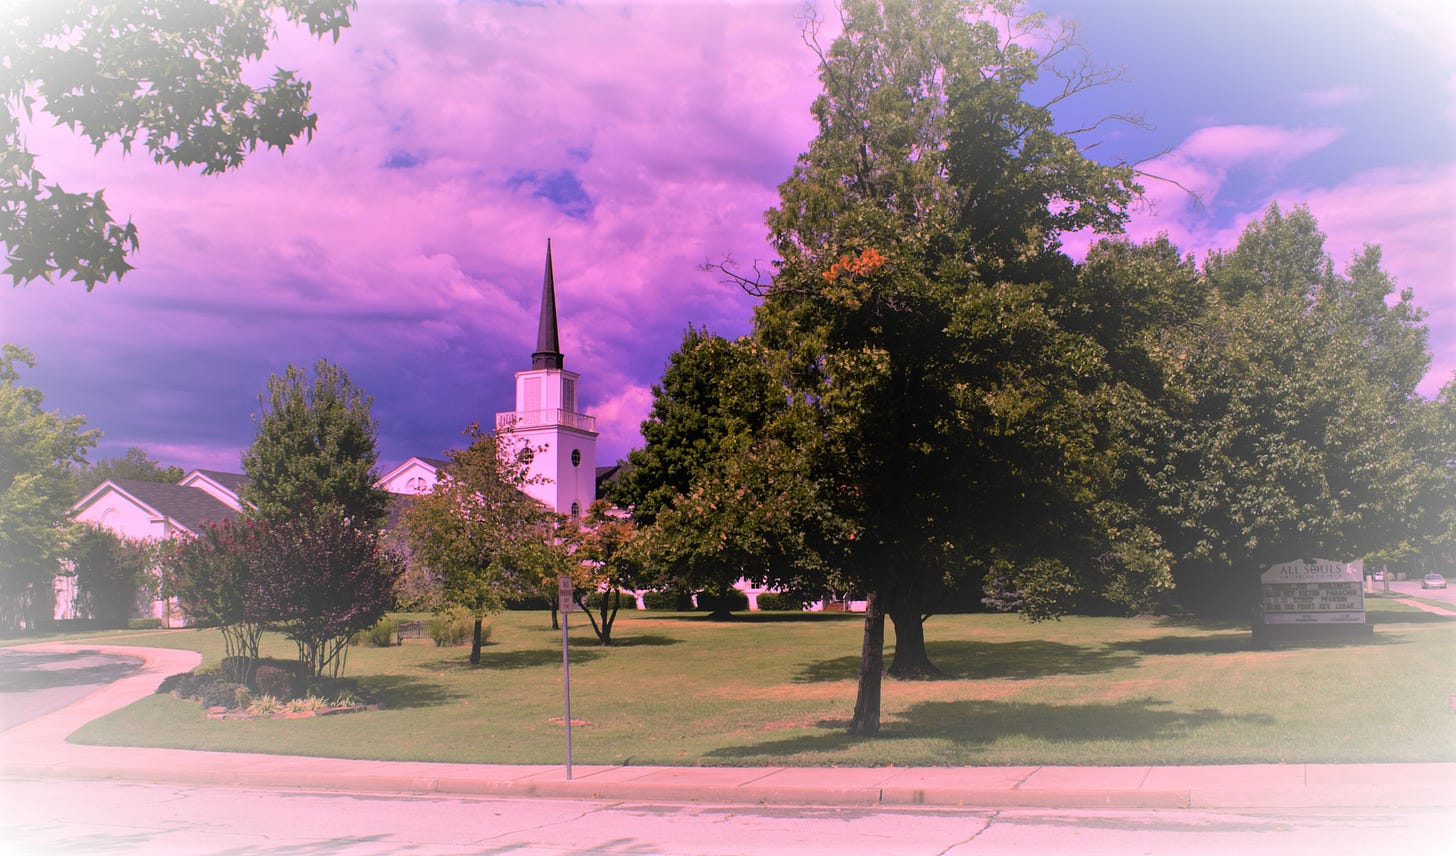 A large yet simple Unitarian church sits on a grassy lawn, with an unadorned steeple. It is surrounded by trees, and the colors are changed to make it feel alien.